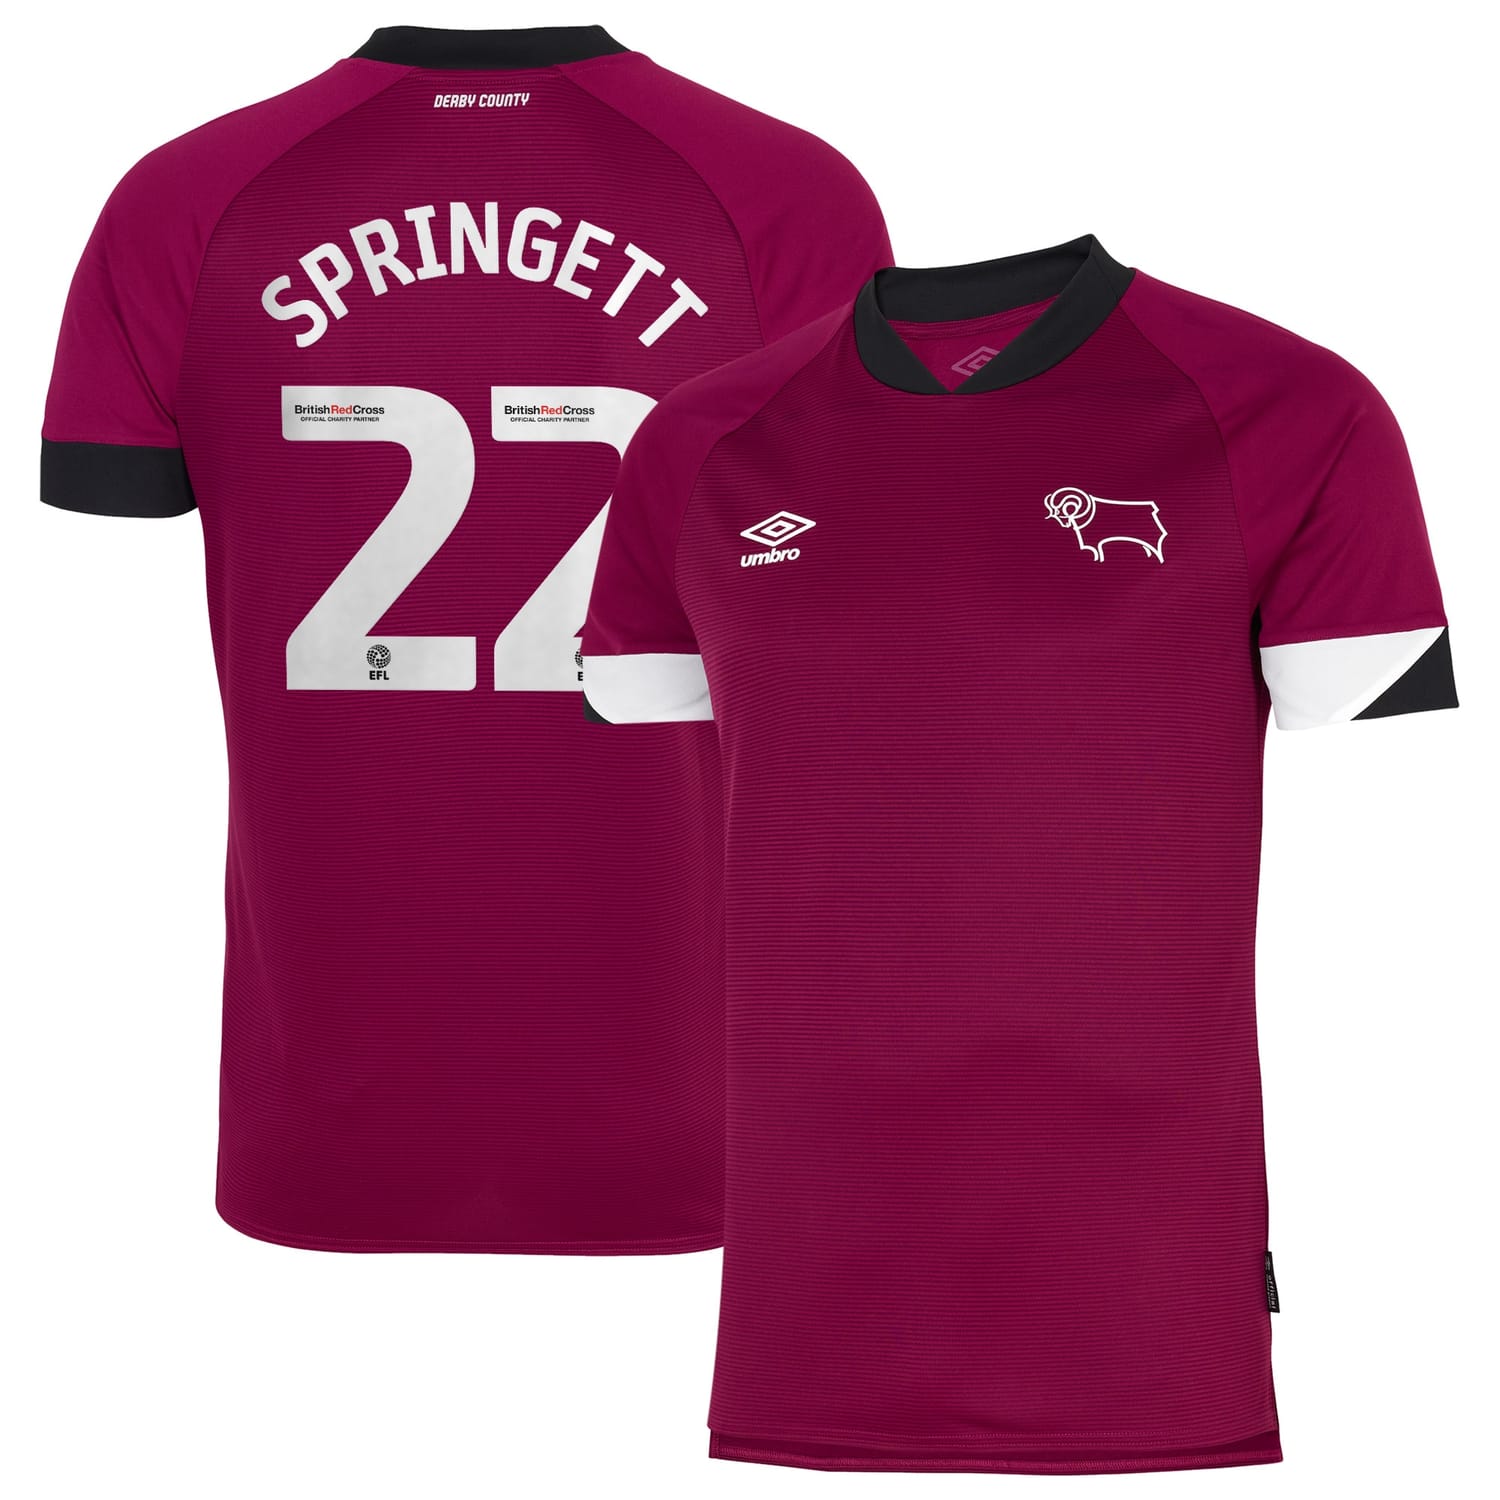 EFL League One Derby County Third Jersey Shirt 2022-23 player Tony Springett 22 printing for Men